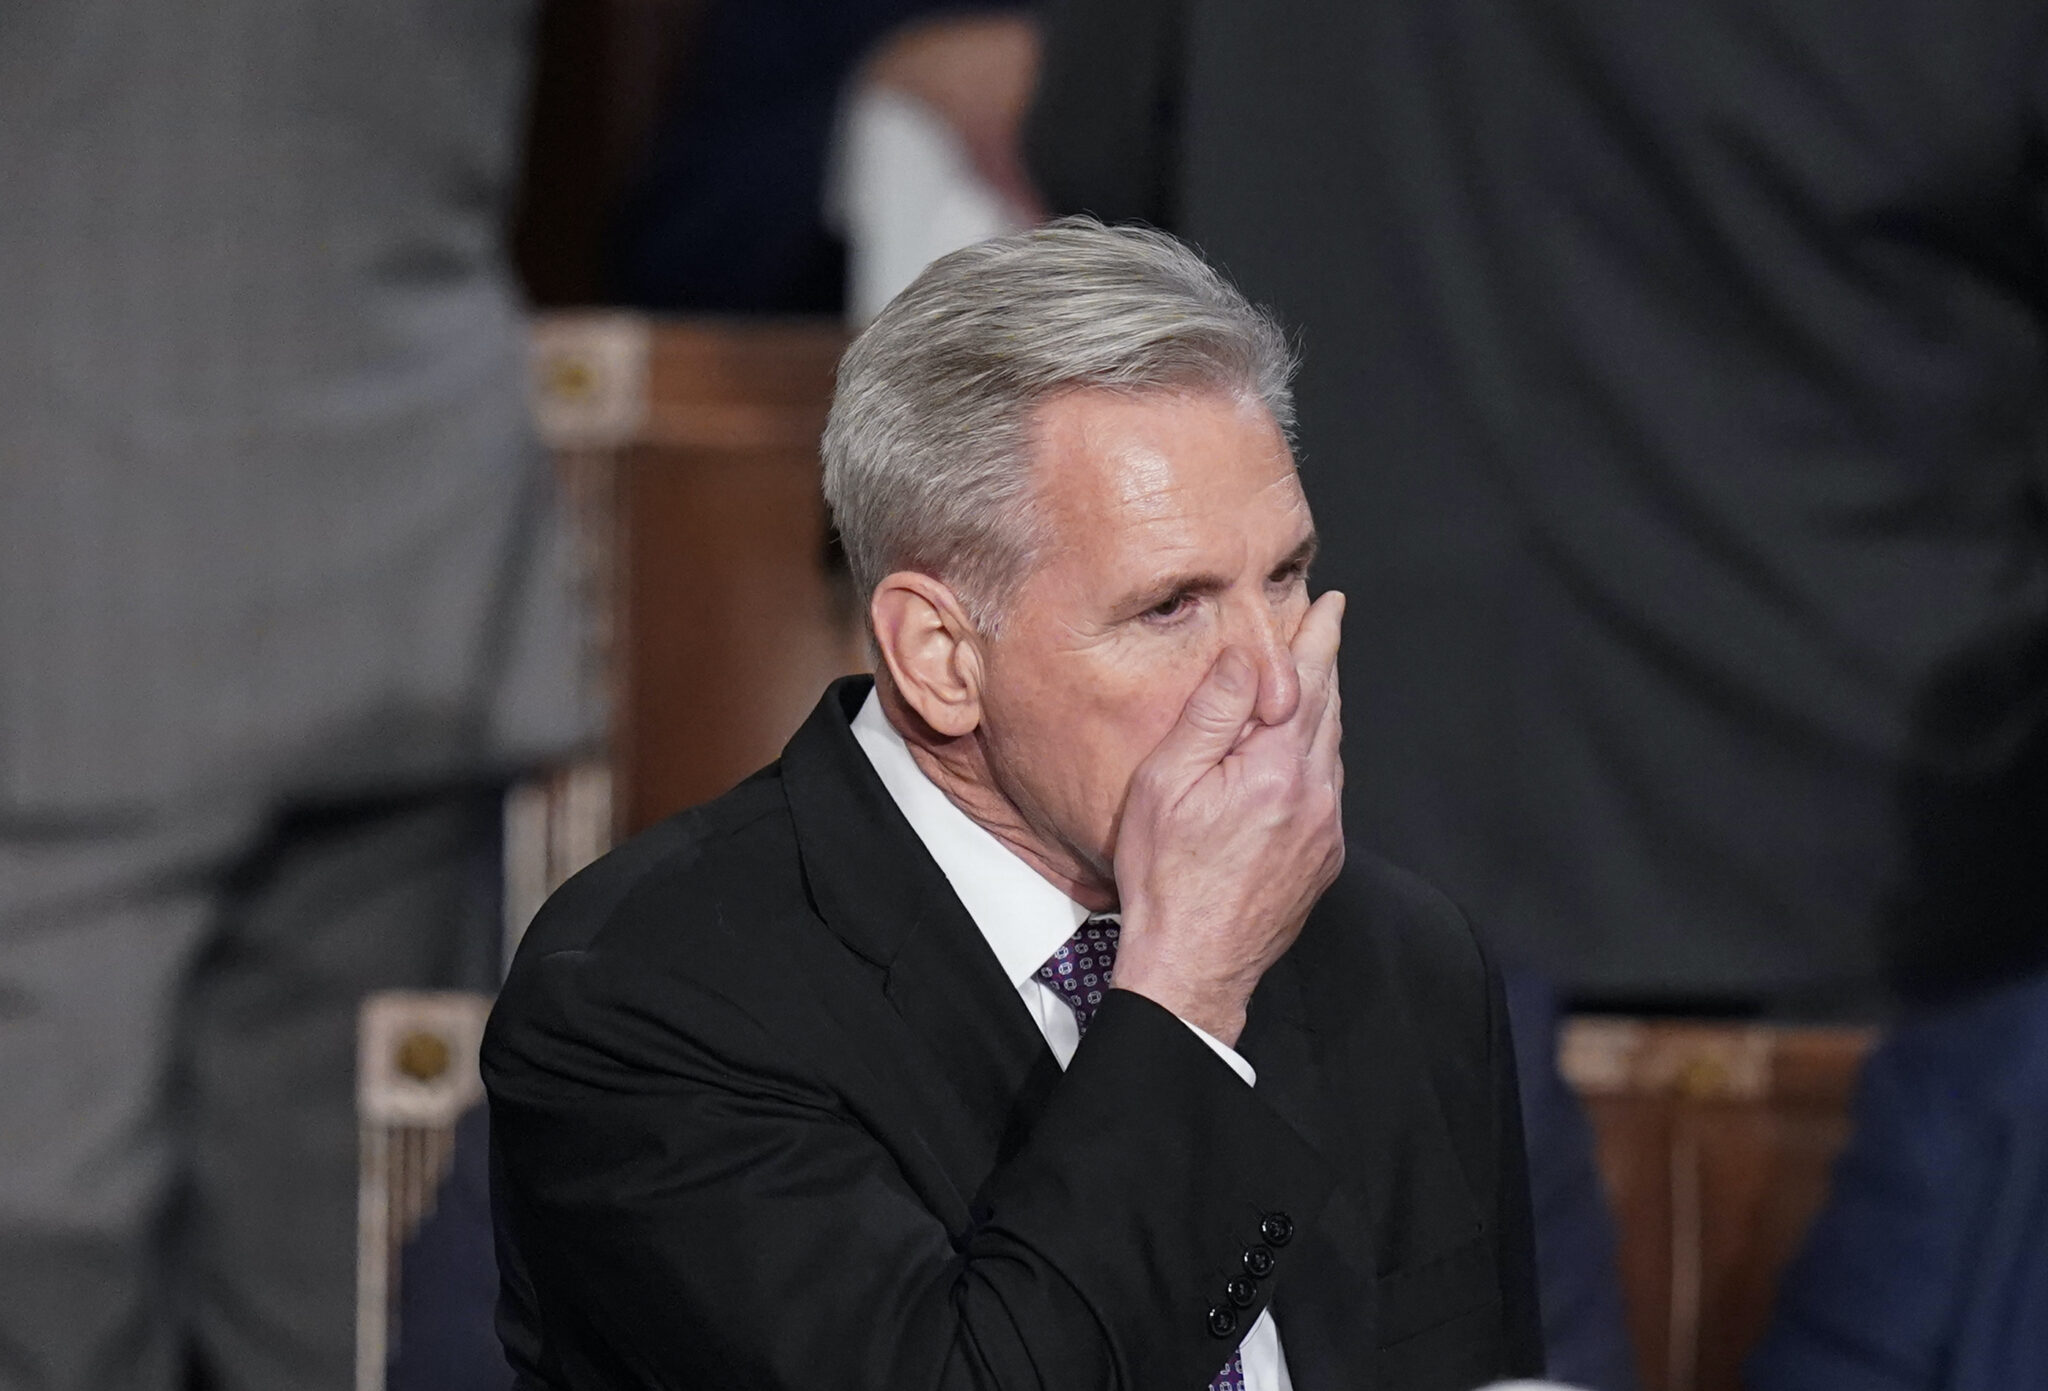 Rep. Kevin McCarthy, R-Calif., arrives to the House chamber at the beginning of an evening session after six failed votes to elect a speaker and convene the 118th Congress in Washington, Wednesday, Jan. 4, 2023. (AP Photo/Alex Brandon)